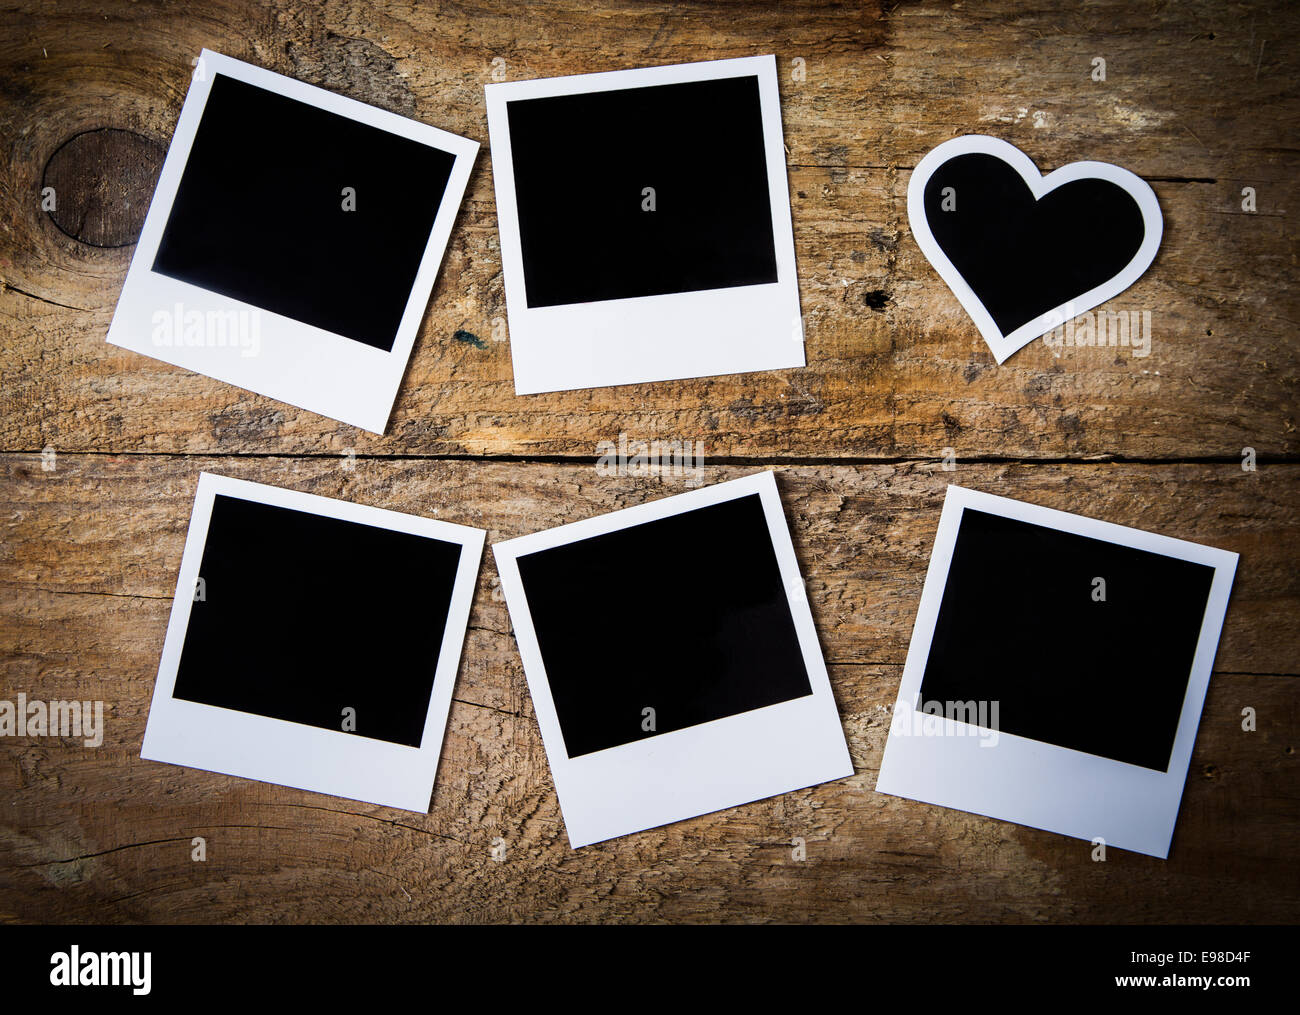 Six empty instant photo frames lying on rustic rough weathered wooden boards, with one heart-shaped for a nostalgic Valentine or anniversary keepsake or memento , overhead view Stock Photo